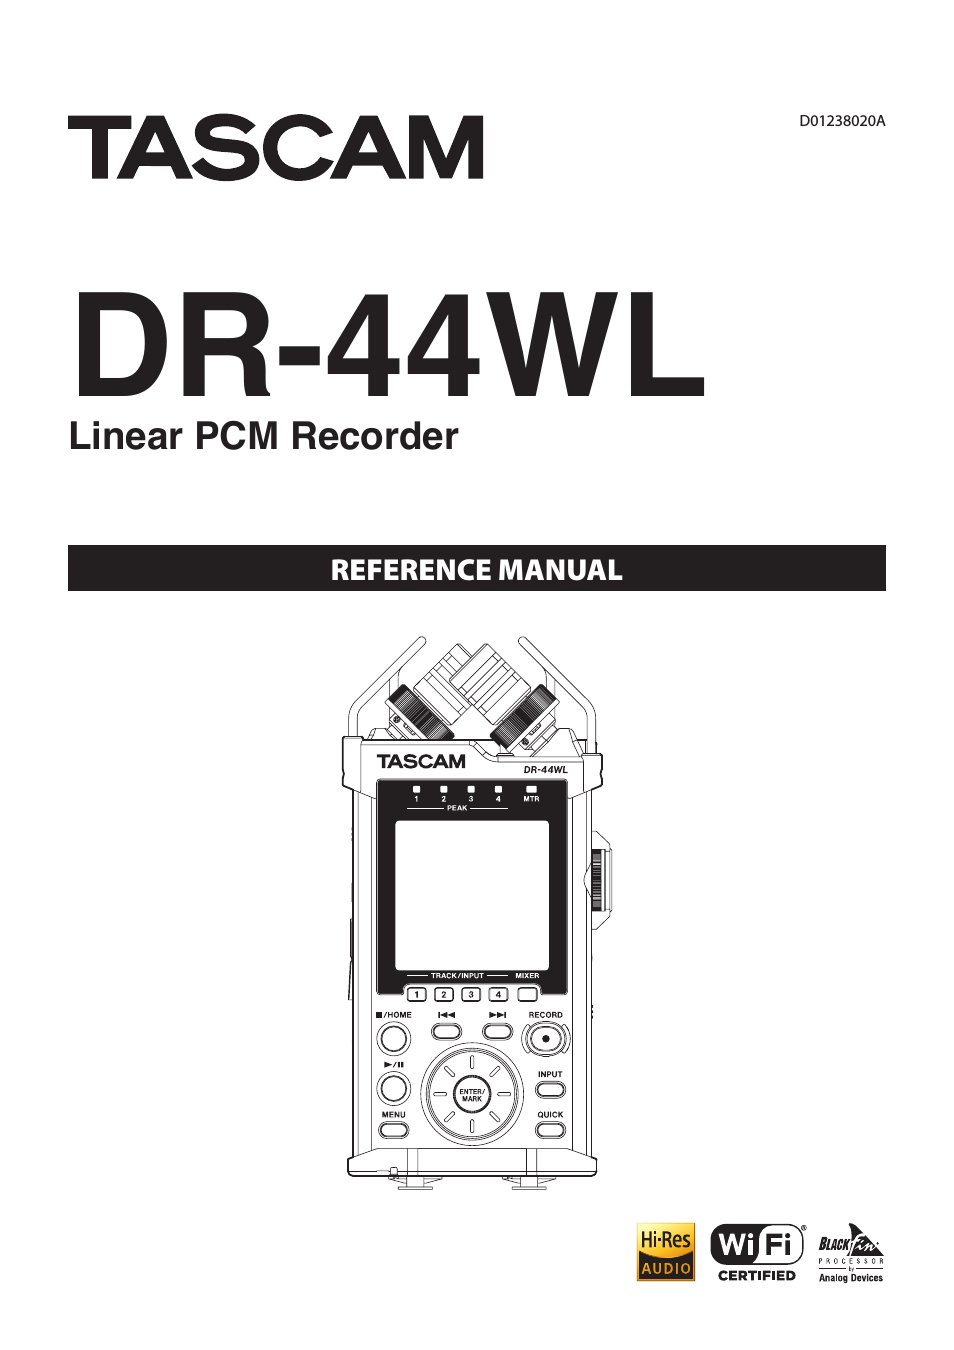 DR-44WL Reference Manual